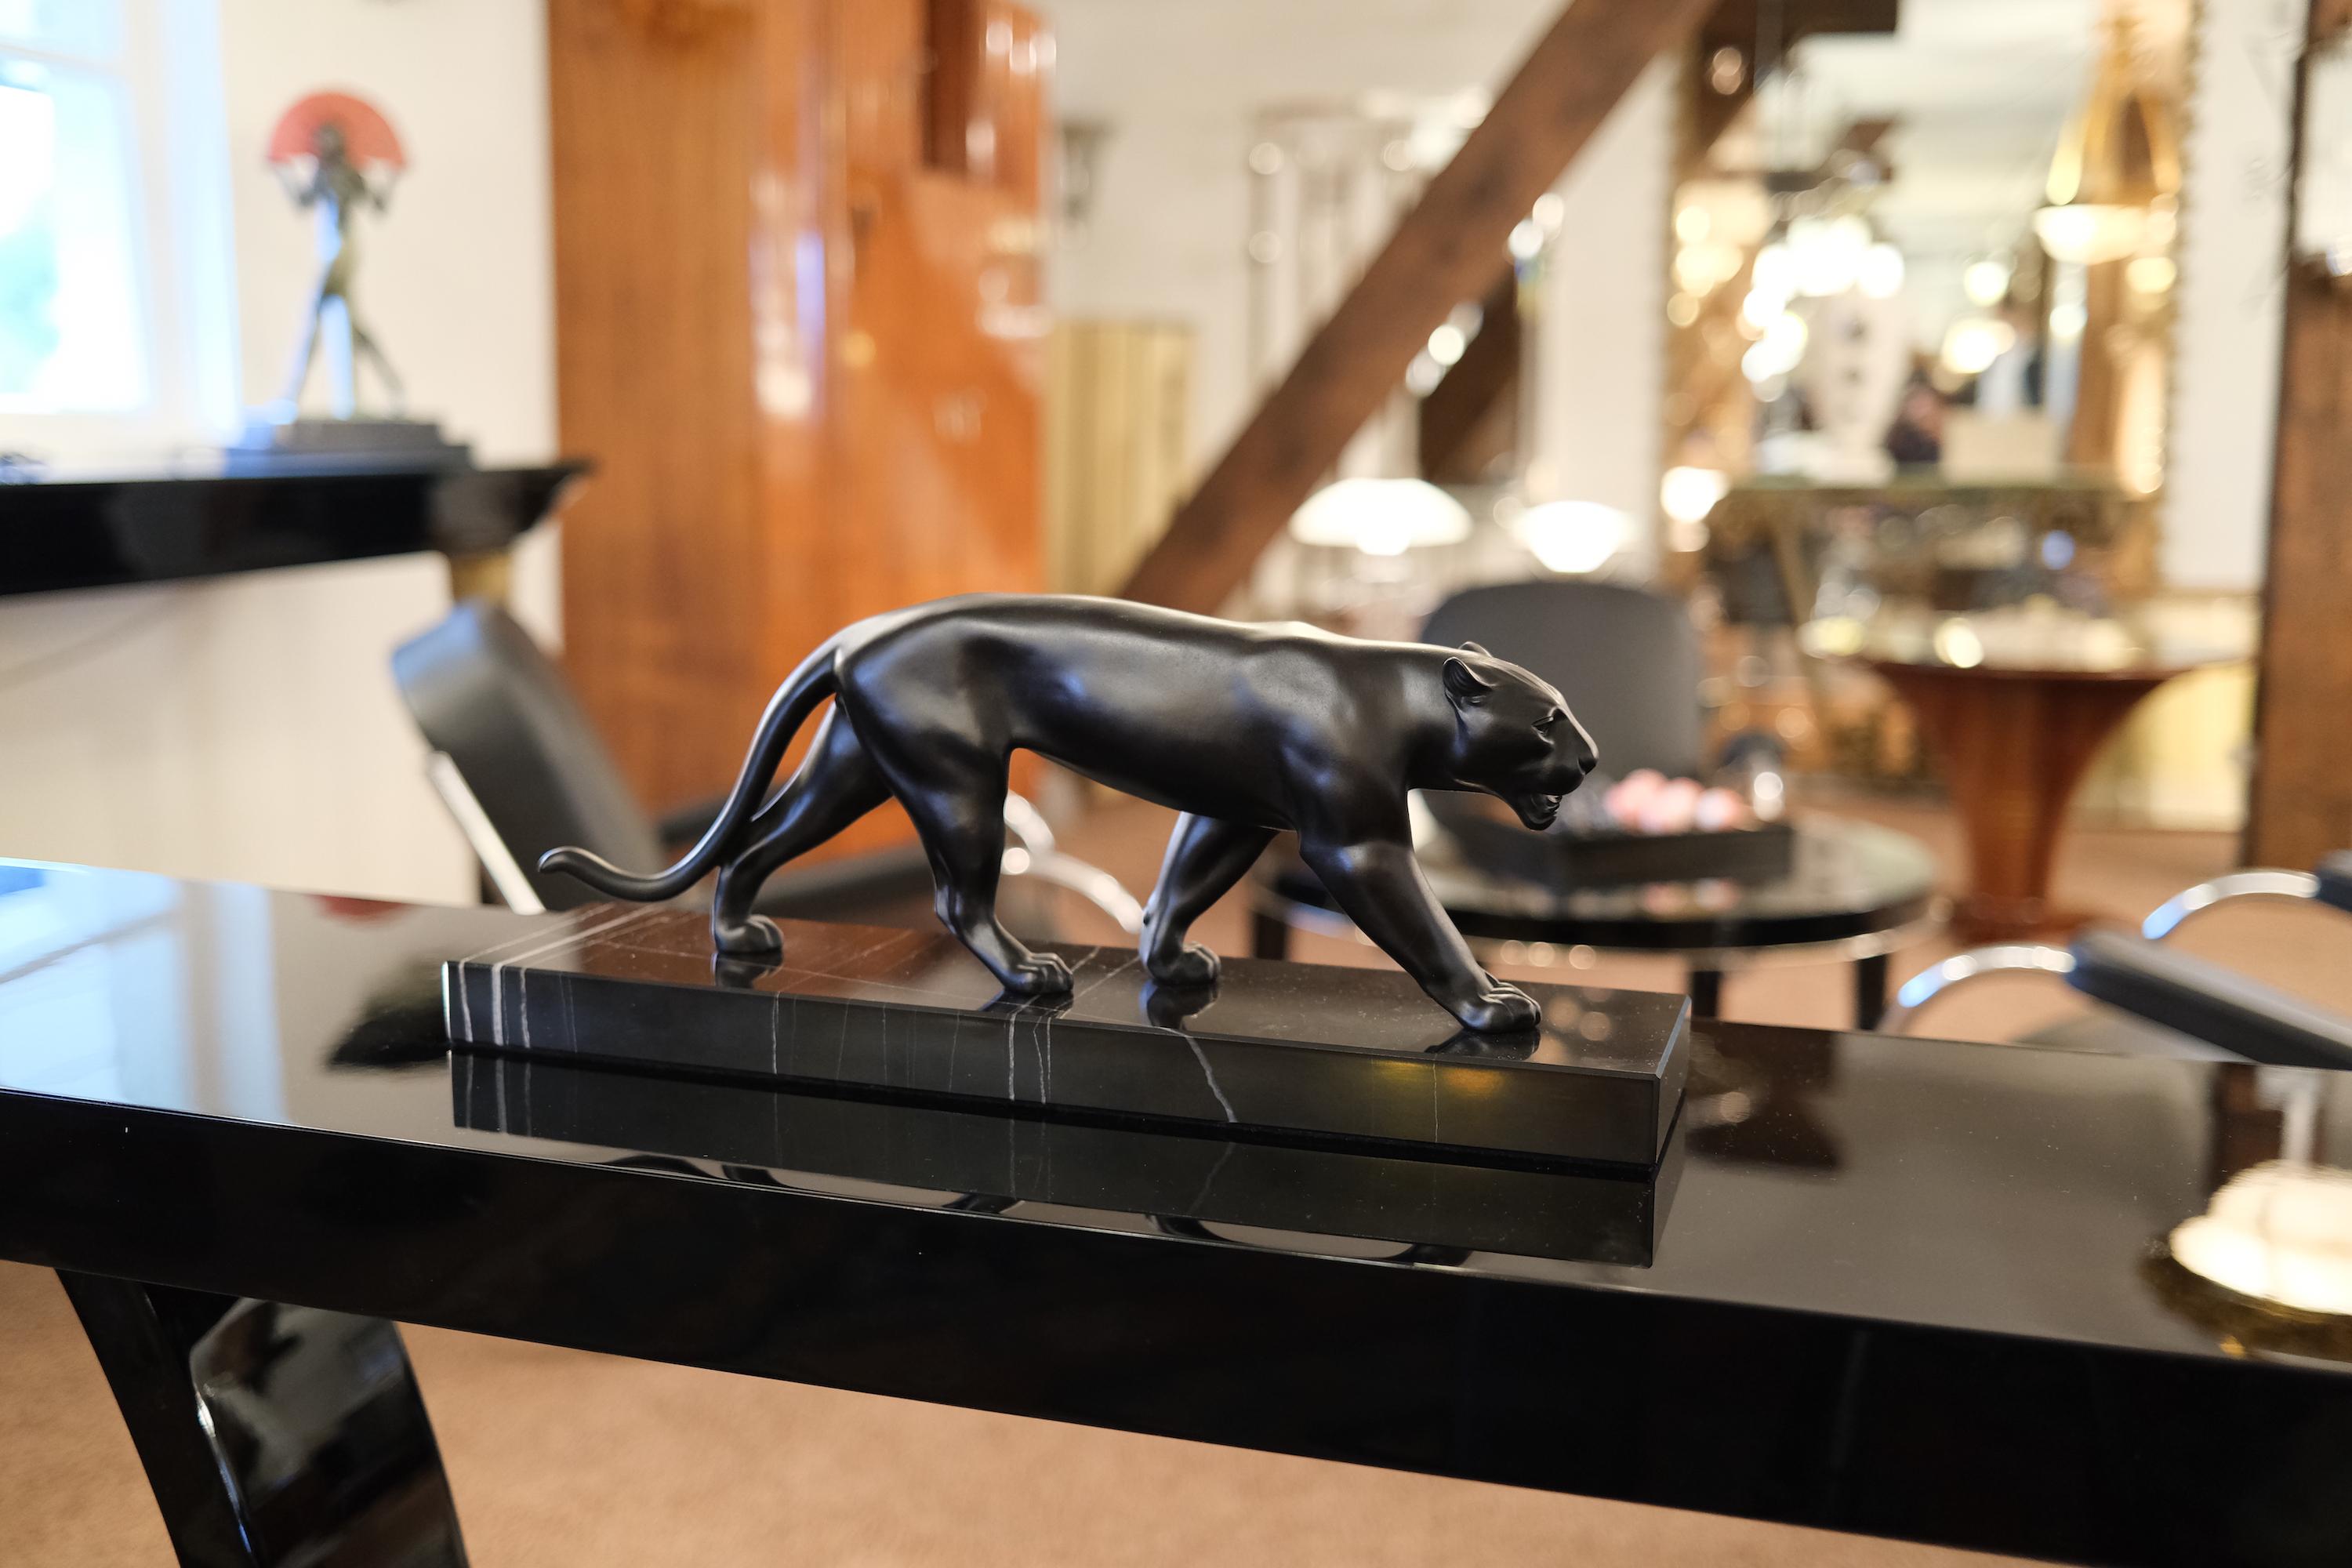 Lion or panther sculpture named “Ouganda”
Original “Max Le Verrier”, signed
Designed in France by “Max Le Verrier” (1891-1973) himself 
Art Deco style, France 

Materials: balck patinated spelter (French: régule), marble base
Socle could have a